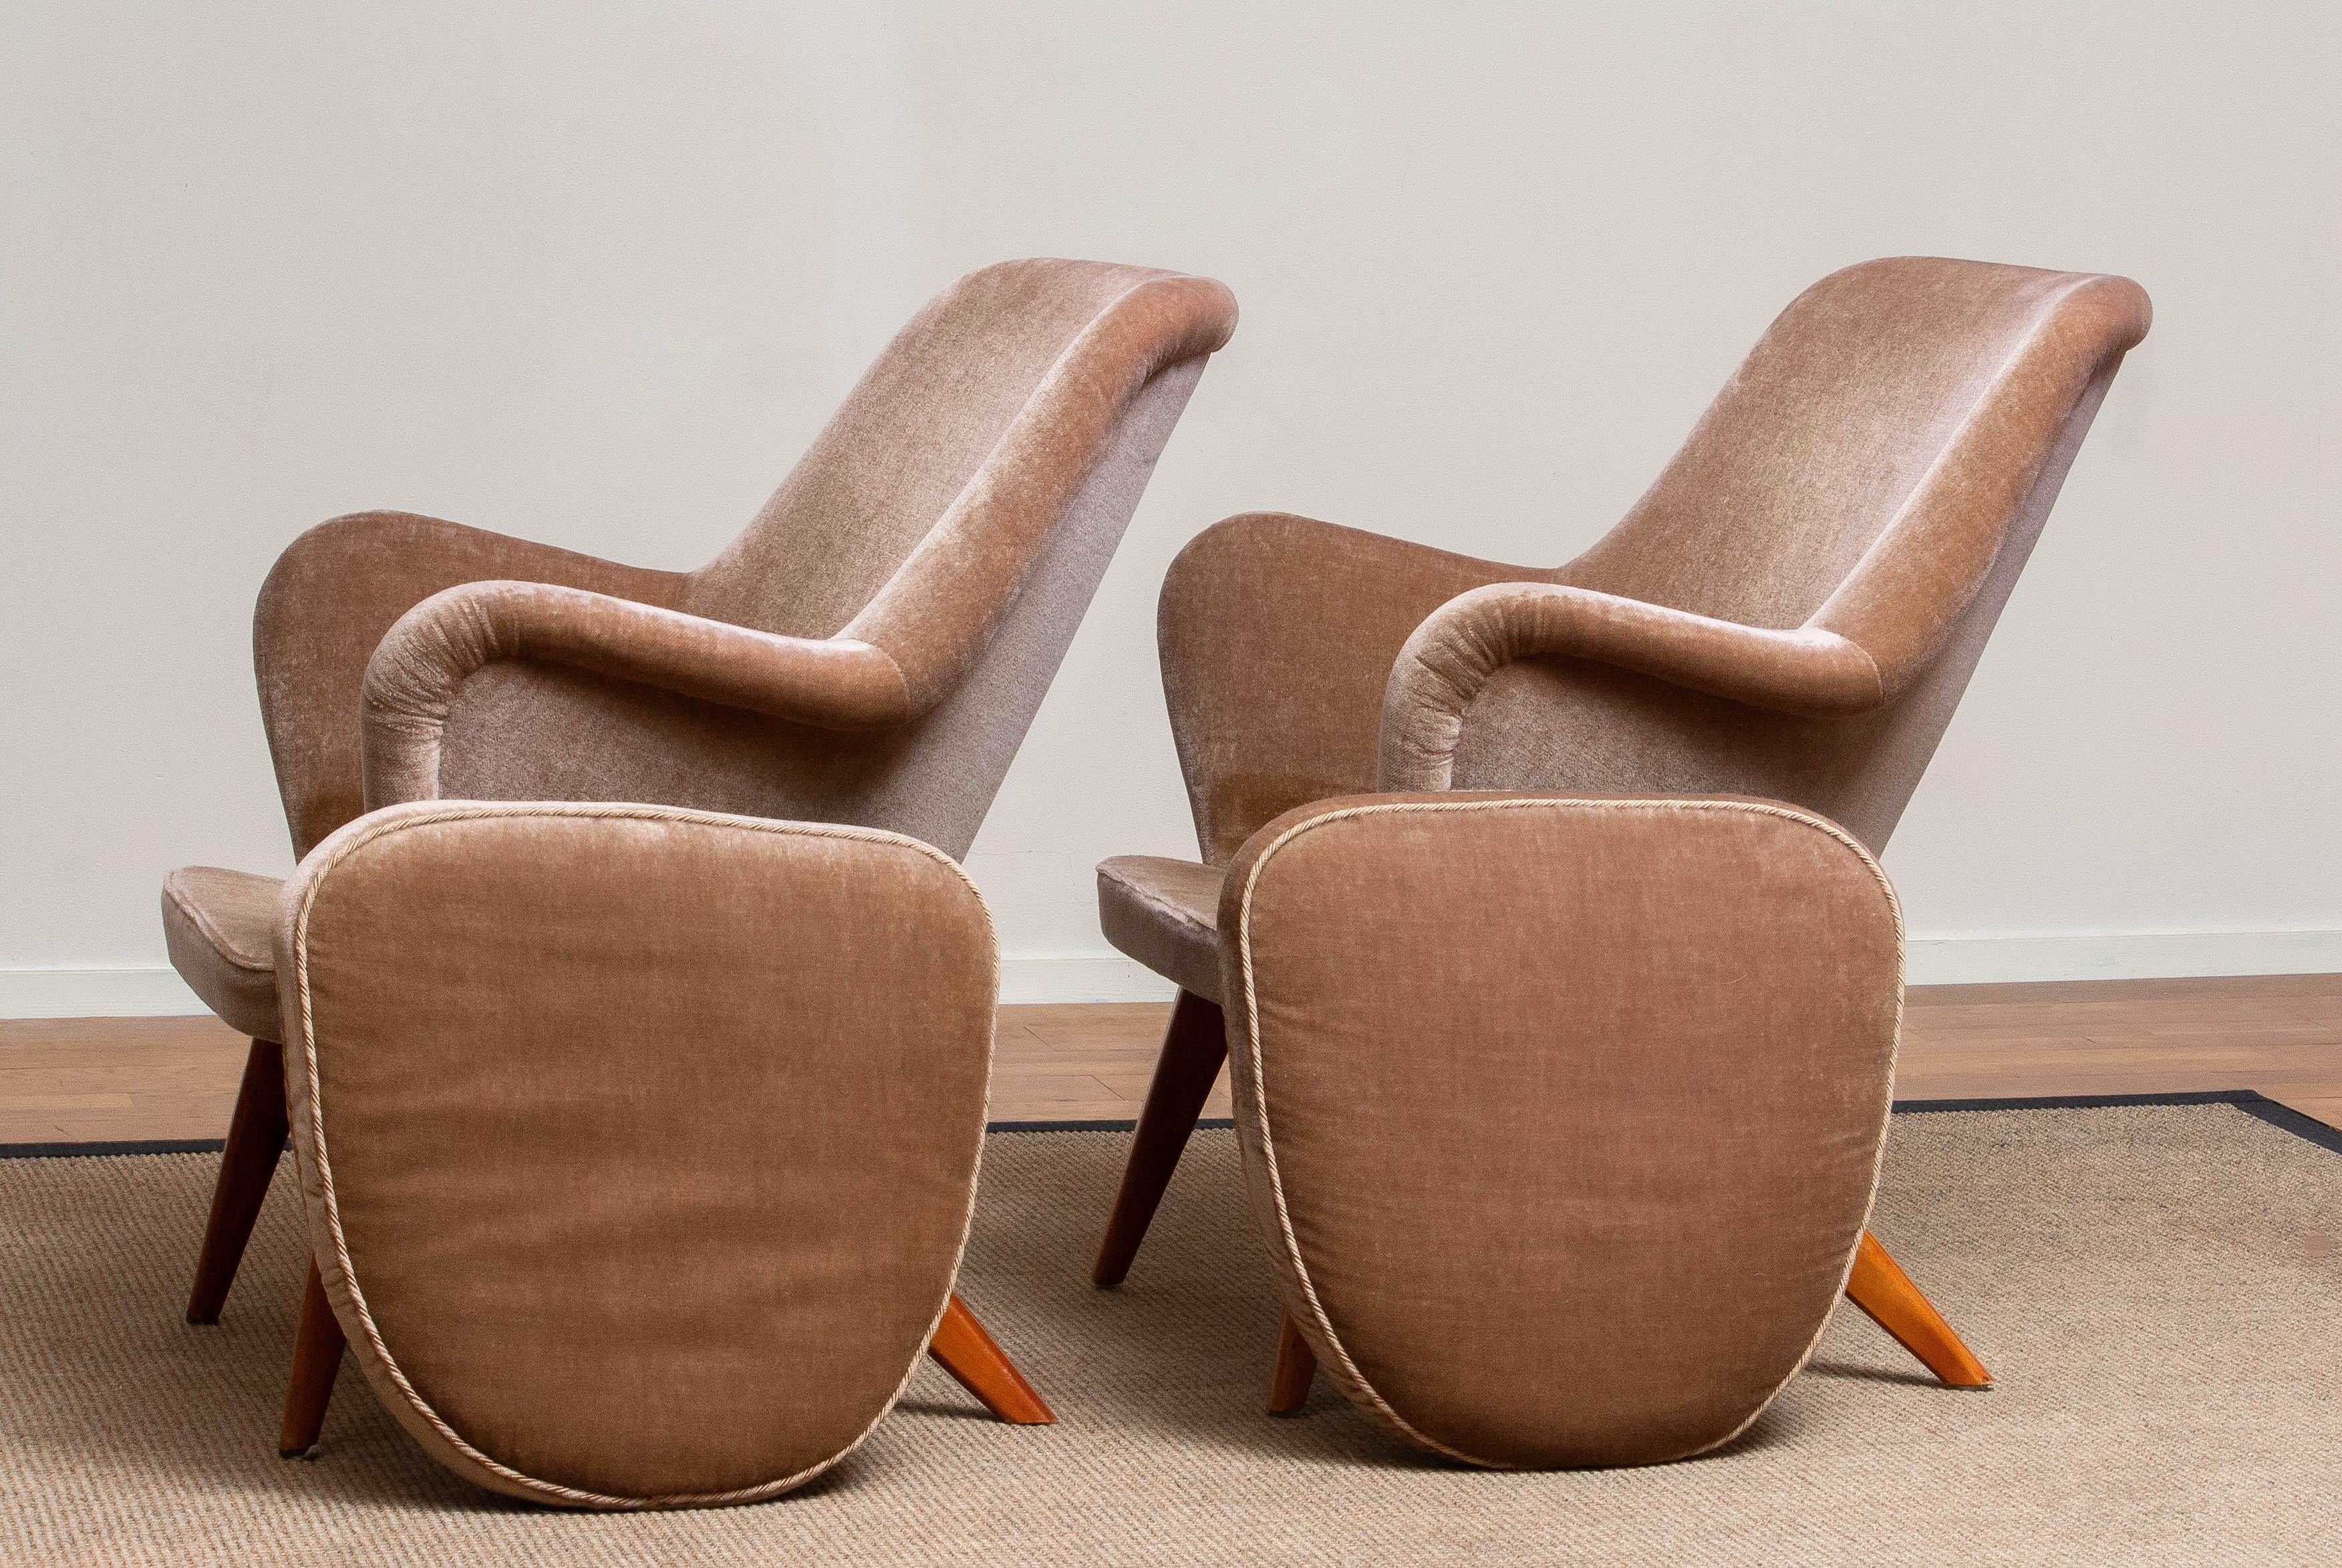 1950s Pair of Chairs by Carl Gustav Hiort af Ornäs for Puunveisto Oy-Trasnideri 4